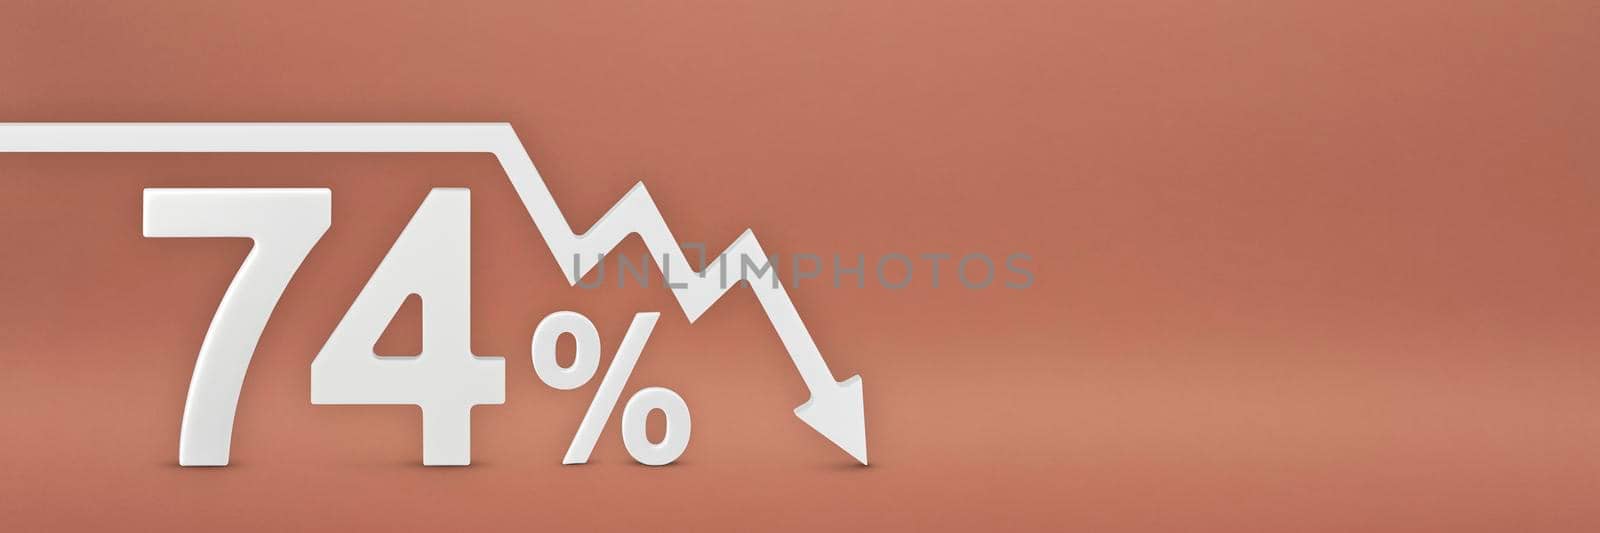 seventy-four percent, the arrow on the graph is pointing down. Stock market crash, bear market, inflation.Economic collapse, collapse of stocks.3d banner,74 percent discount sign on a red background. by SERSOL